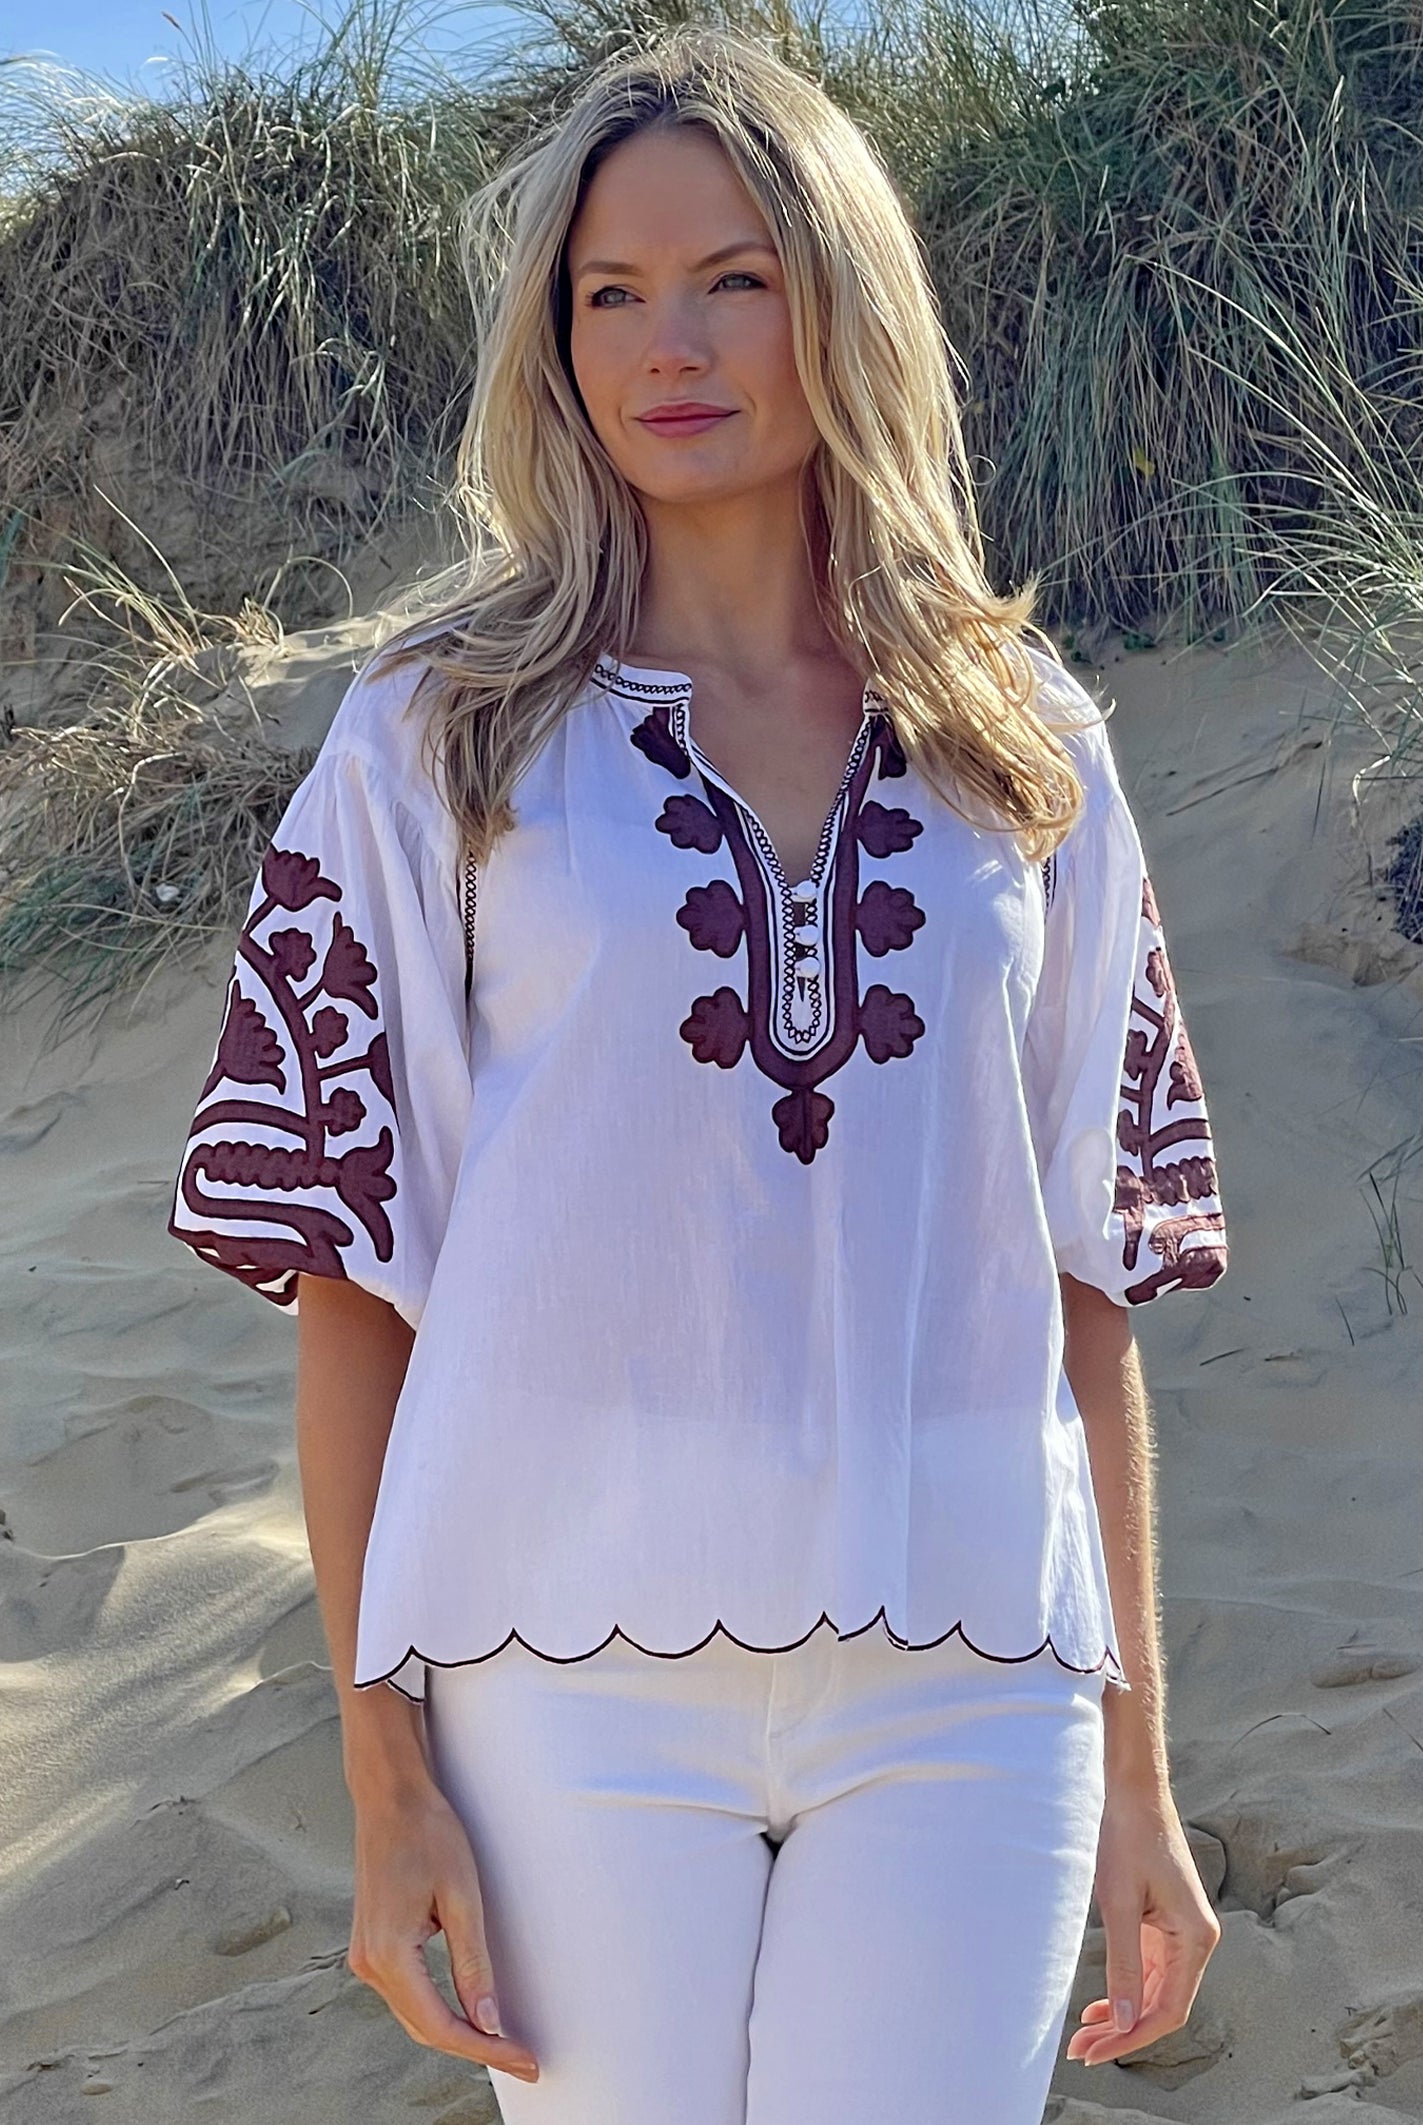 A model on a beach wearing the Rose and Rose Ferrara top in white cotton with bitter chocolate applique.